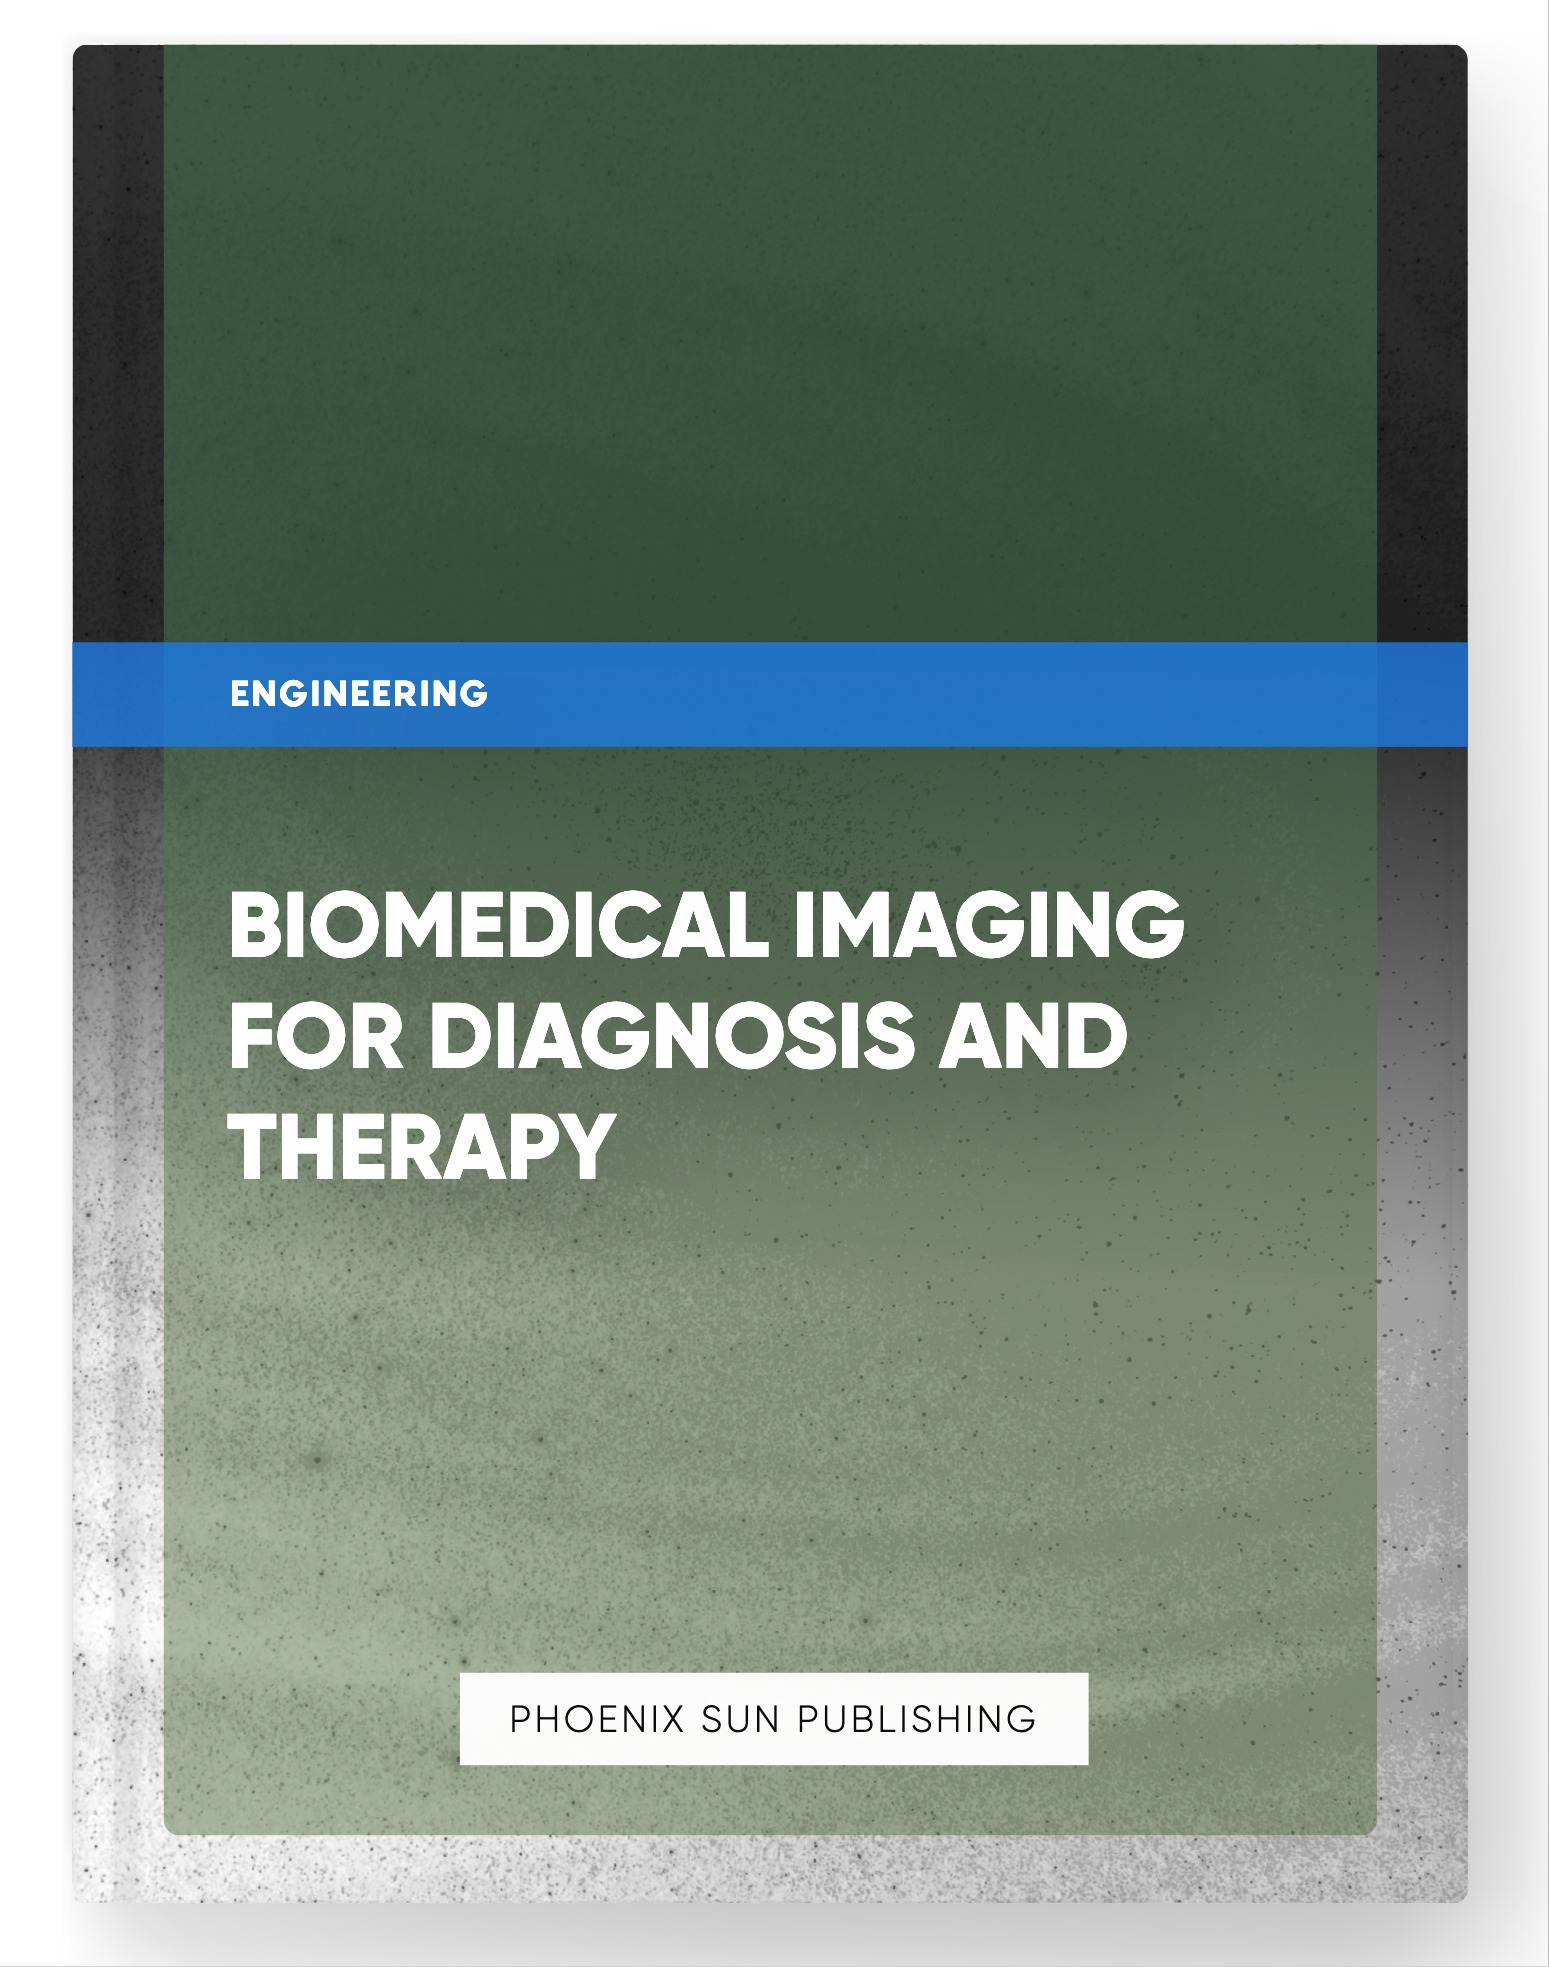 Biomedical Imaging for Diagnosis and Therapy